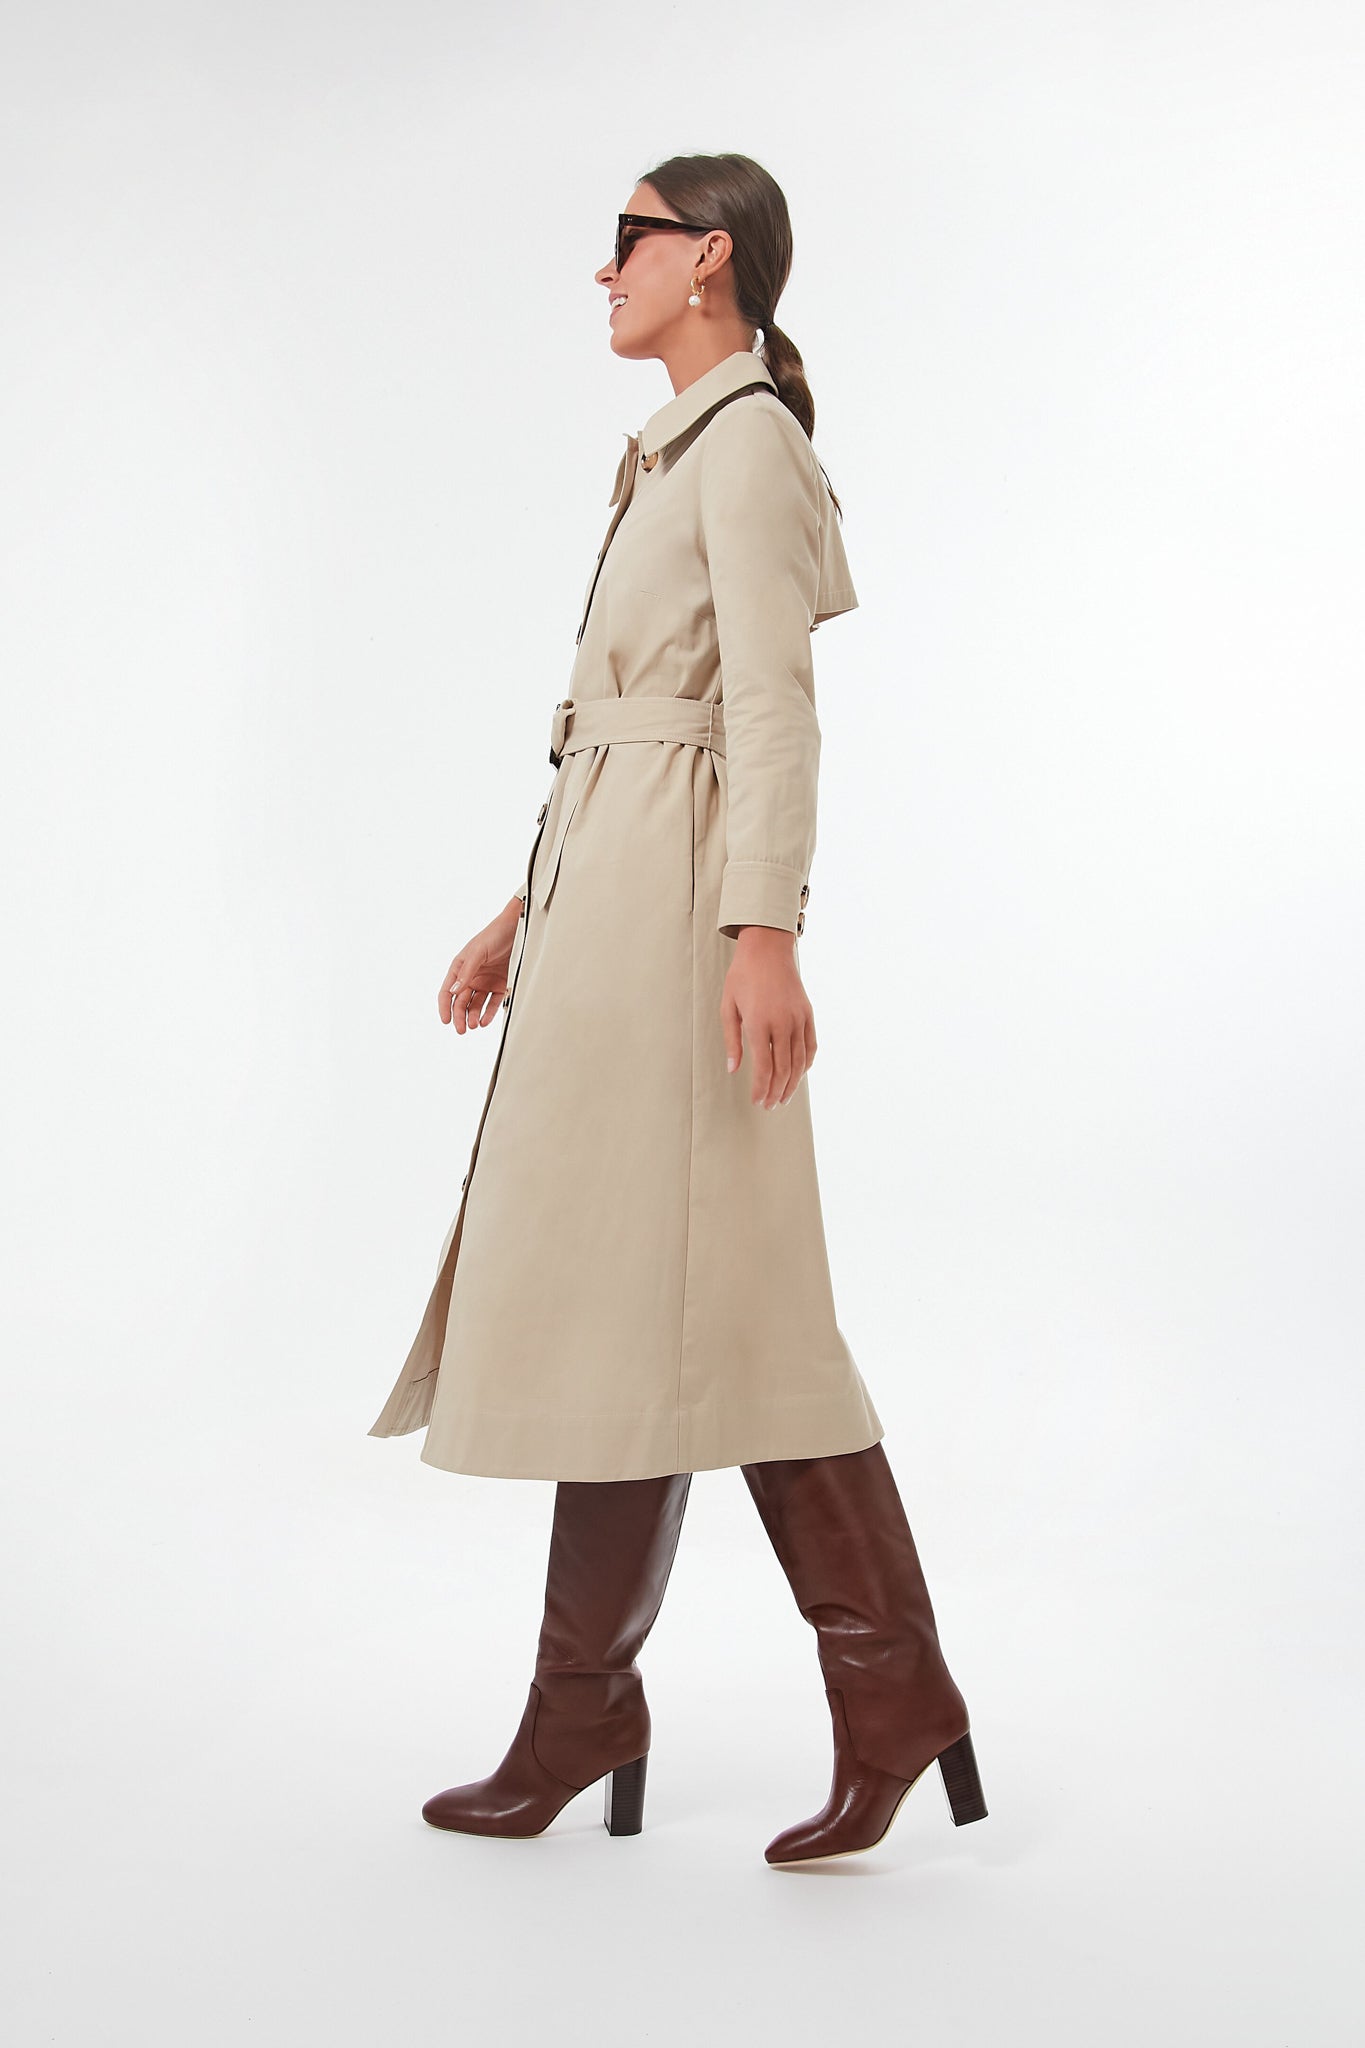 In the Trenches: A New Job and A Red Trench Coat - Running in Heels